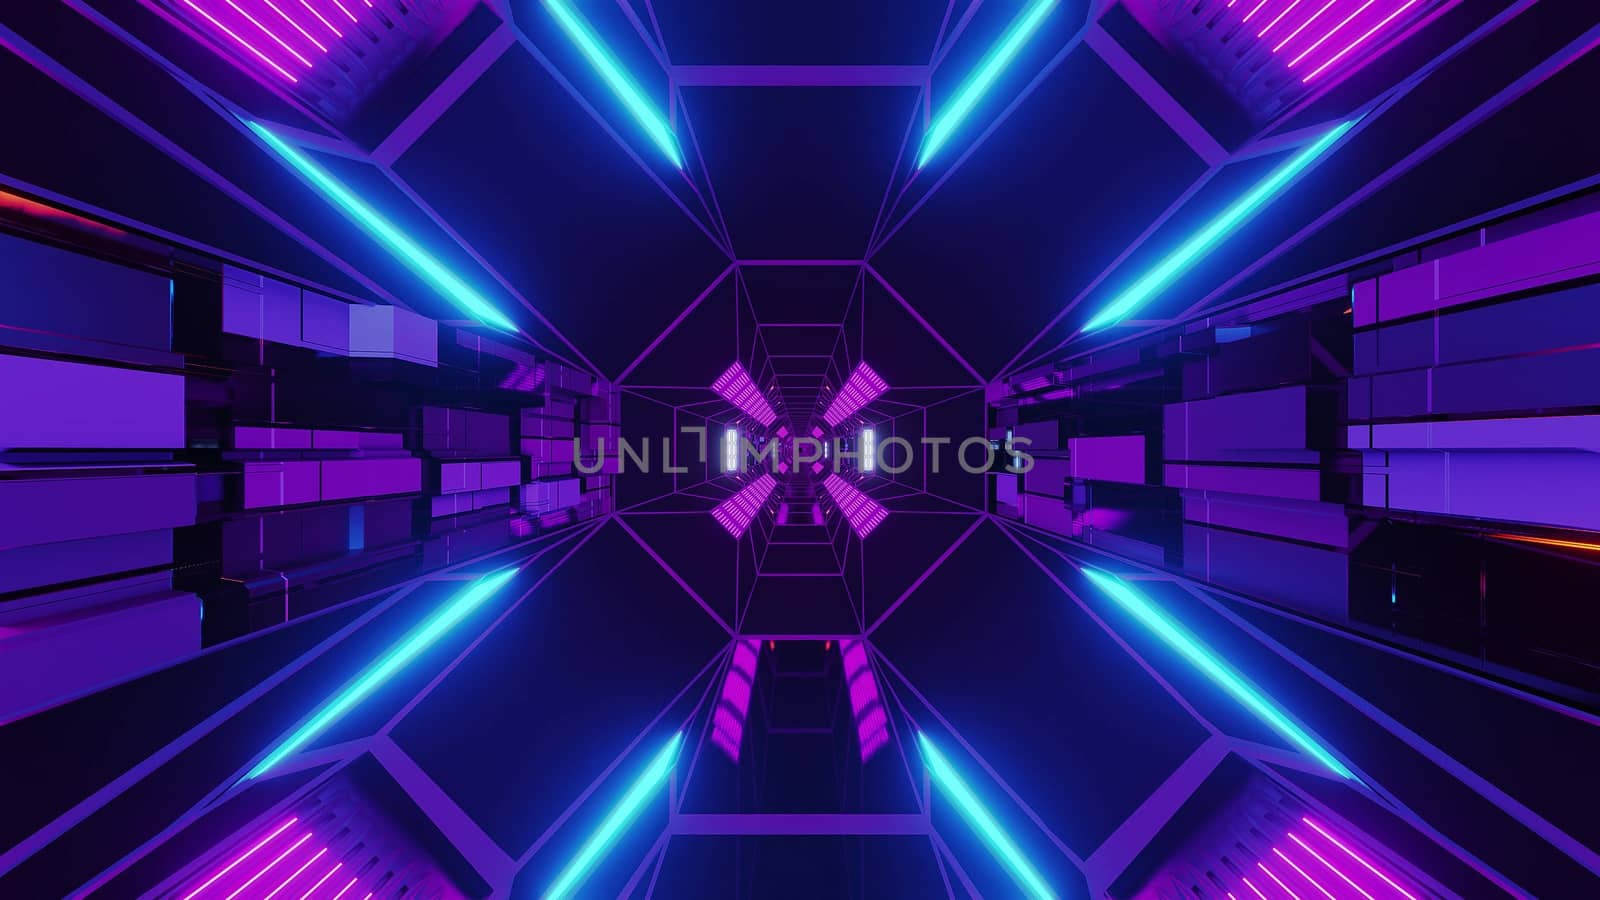 creative endless futurisic sci-fi tunnel corridor with technical texture 3d illustration wallpaper background graphic artwork by tunnelmotions